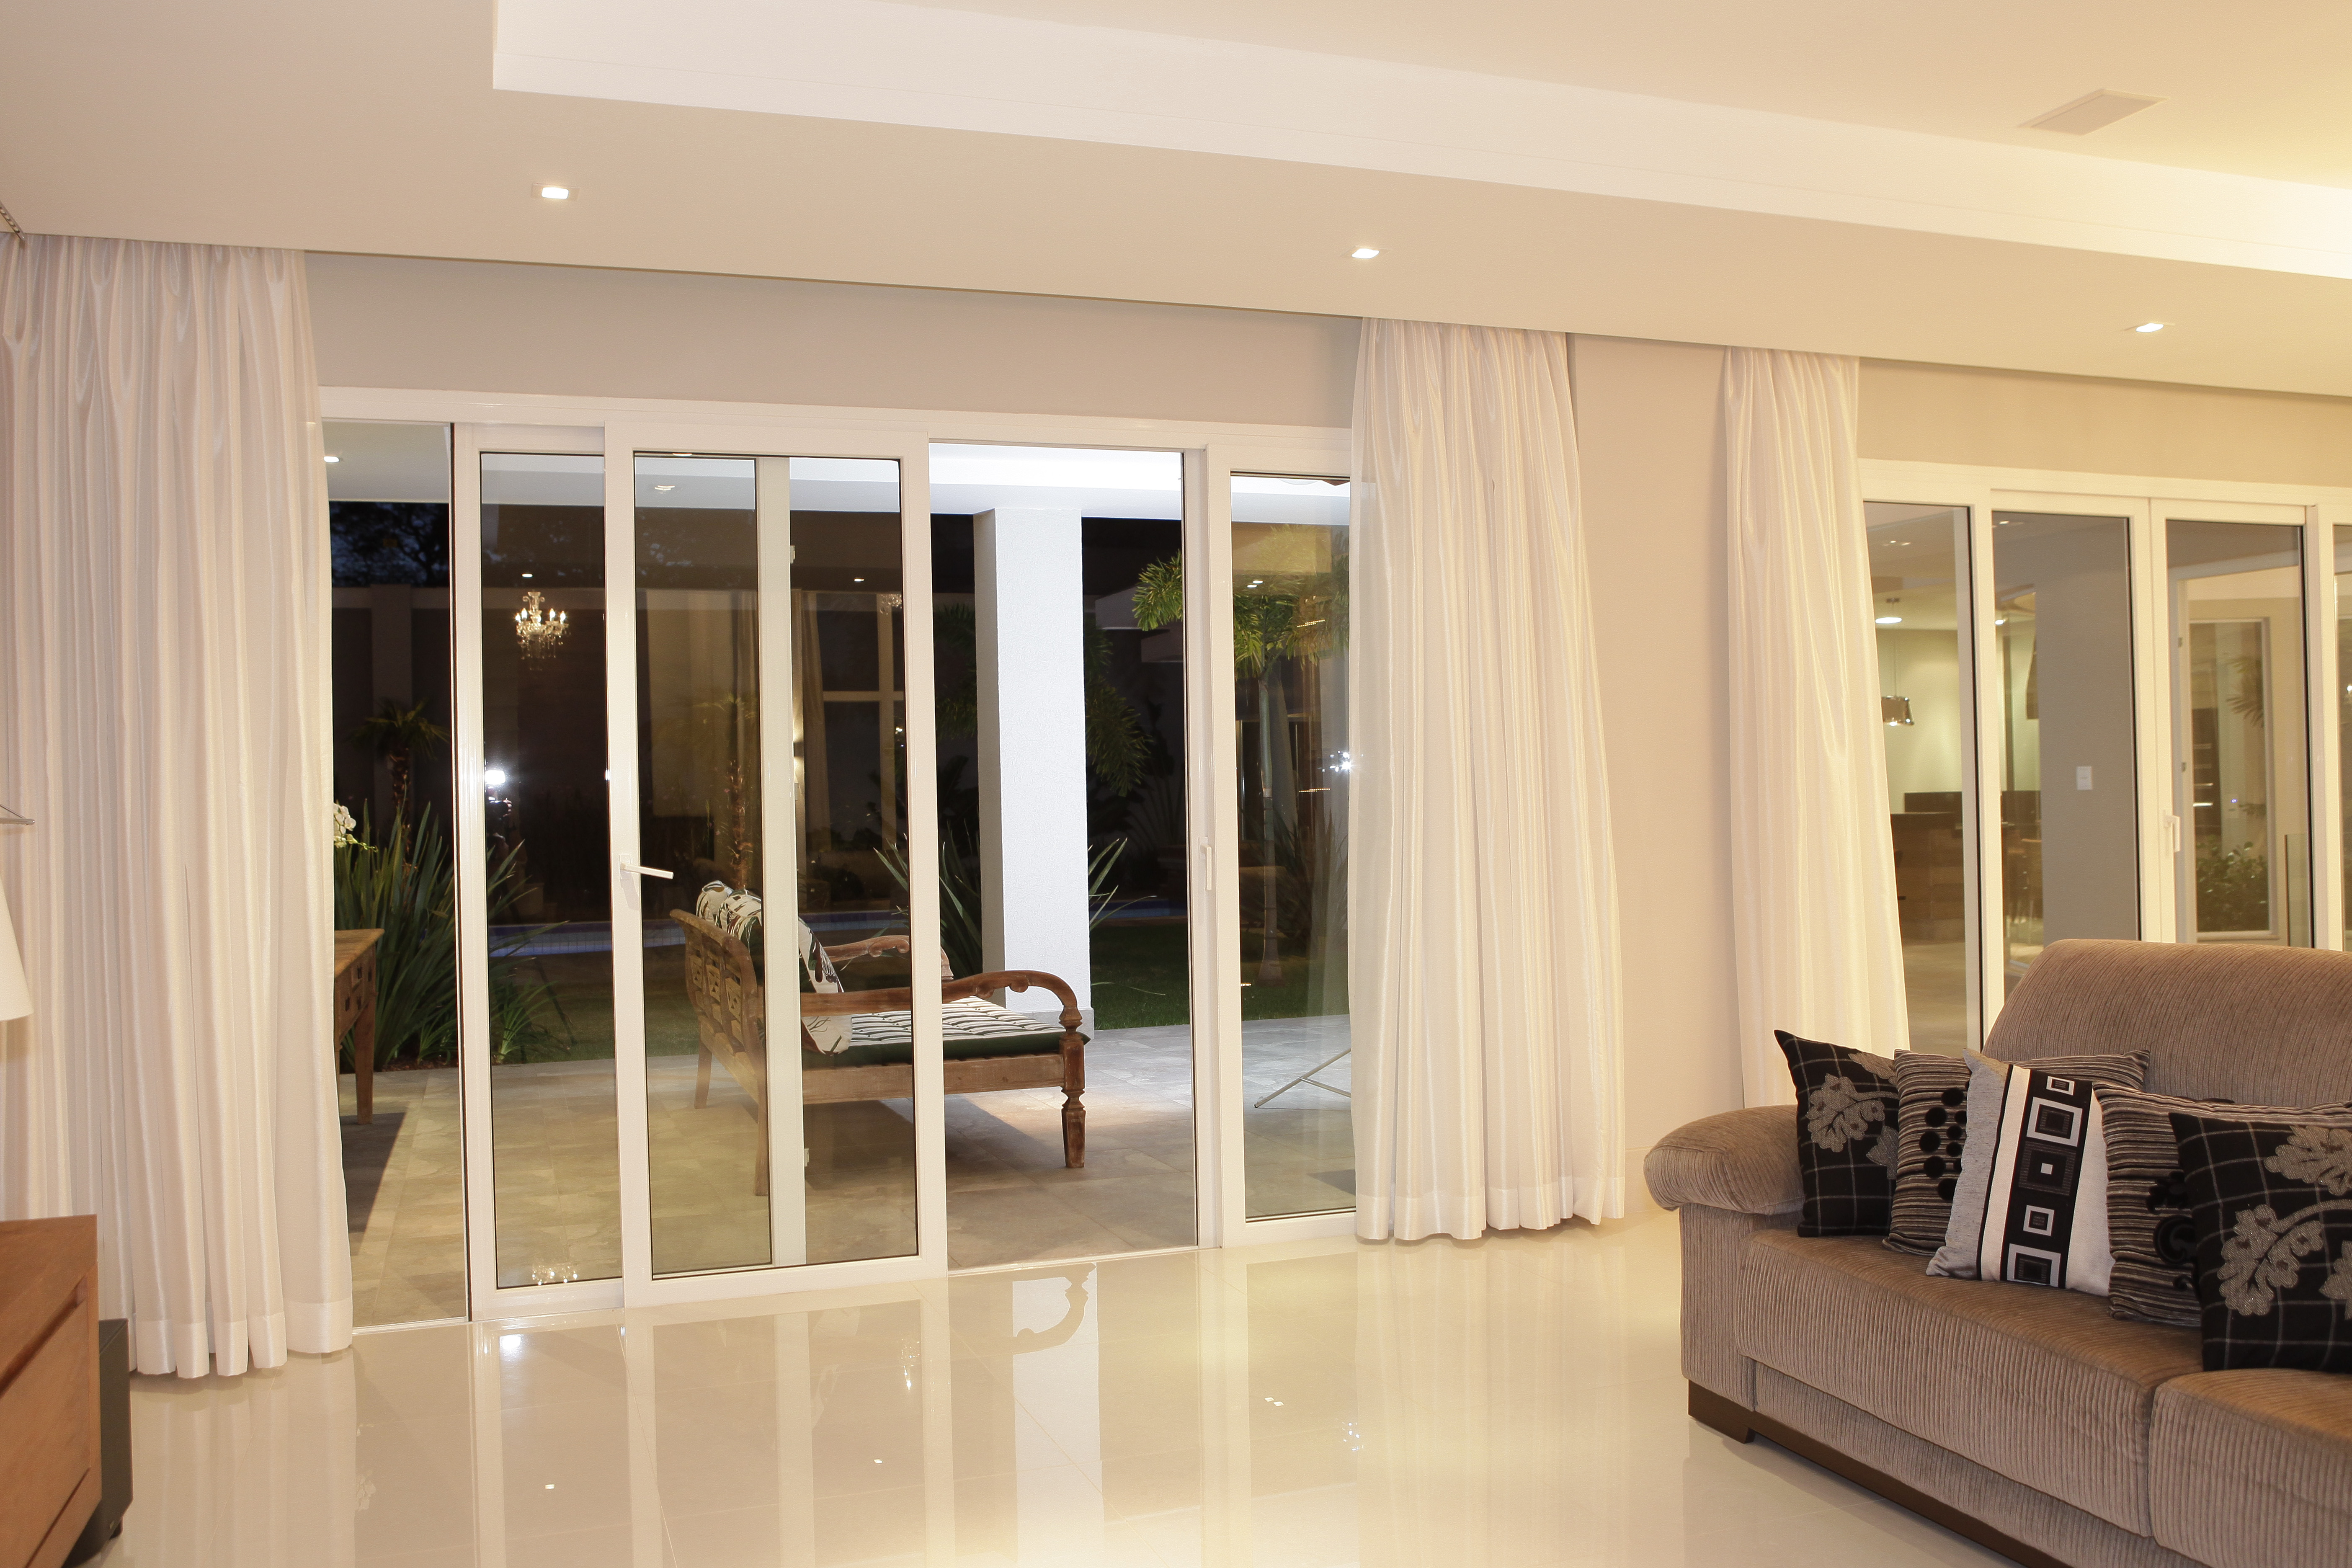 You are currently viewing BRING THE WORLD INTO THE HEART OF YOUR HOME WITH WINDOW MAGIC’S SLIDING DOORS AND WINDOWS